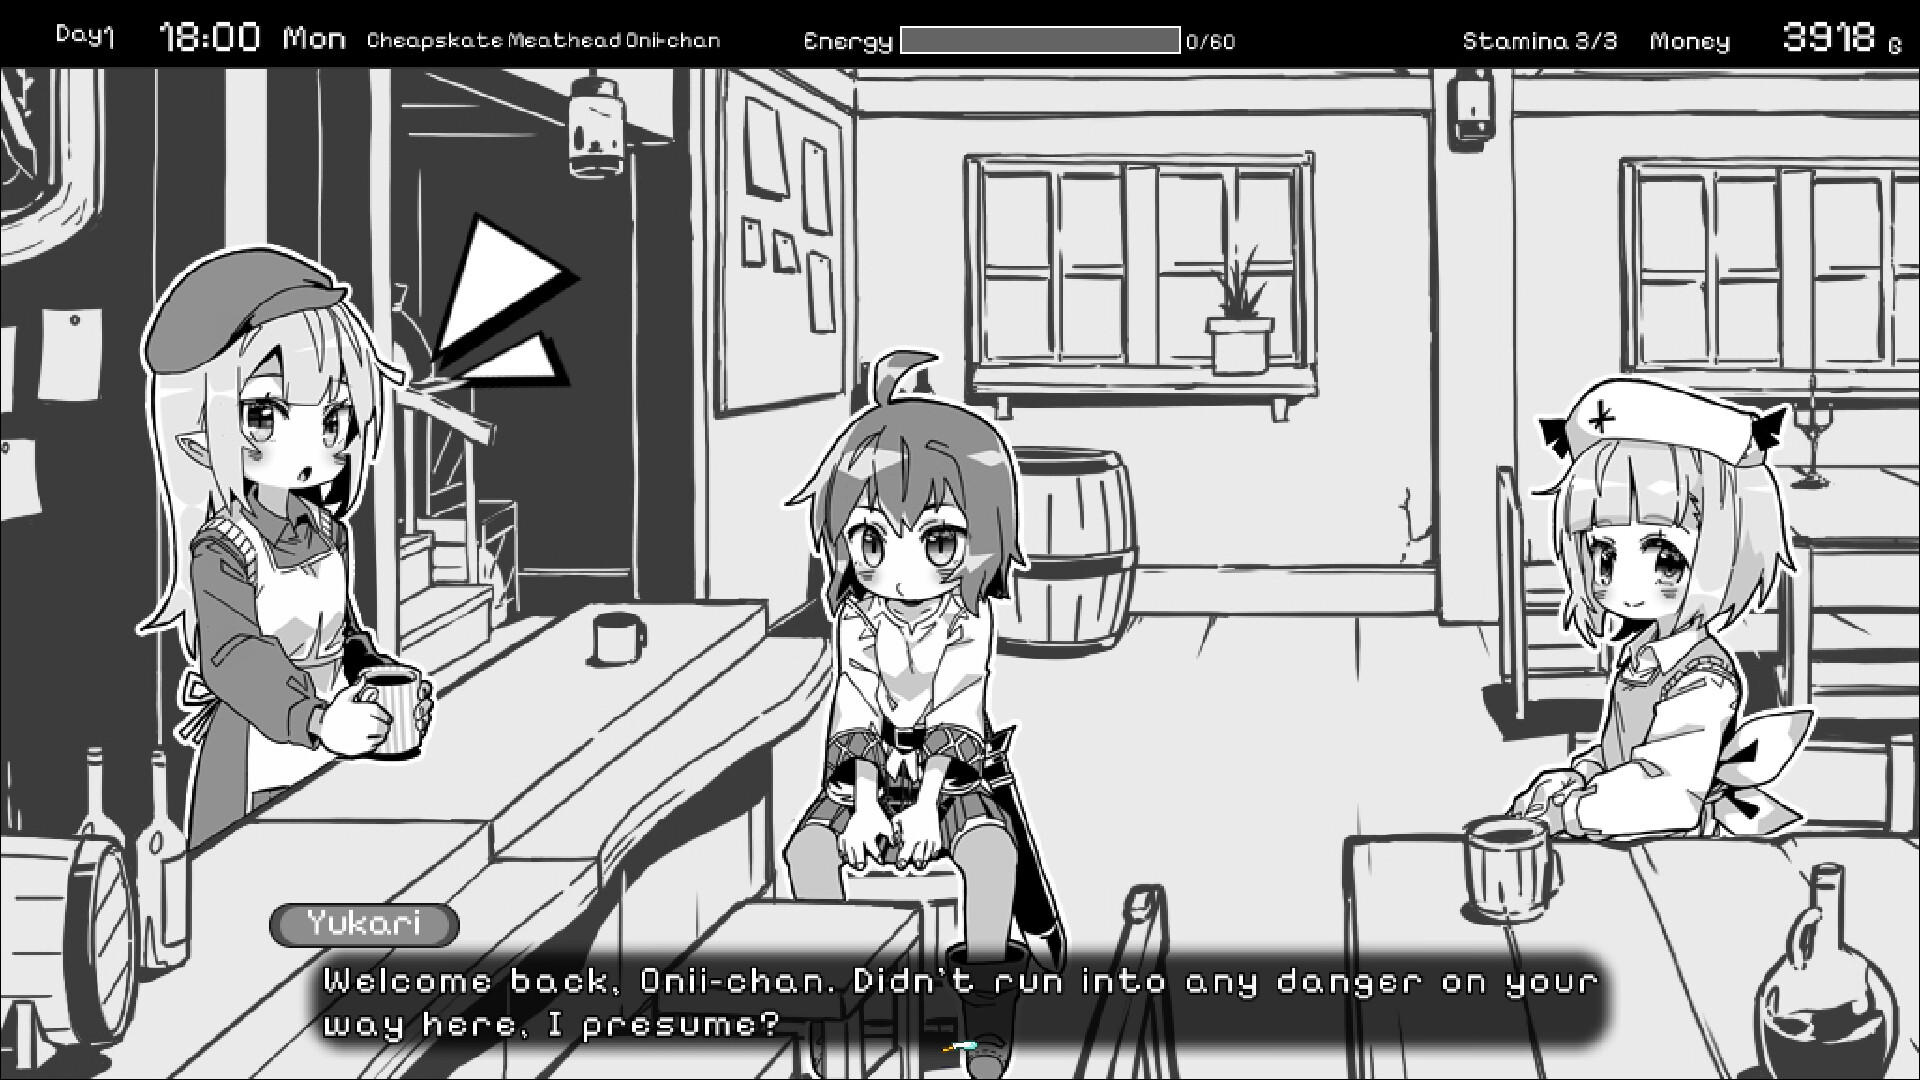 Living With Sister: Monochrome Fantasy screenshot game